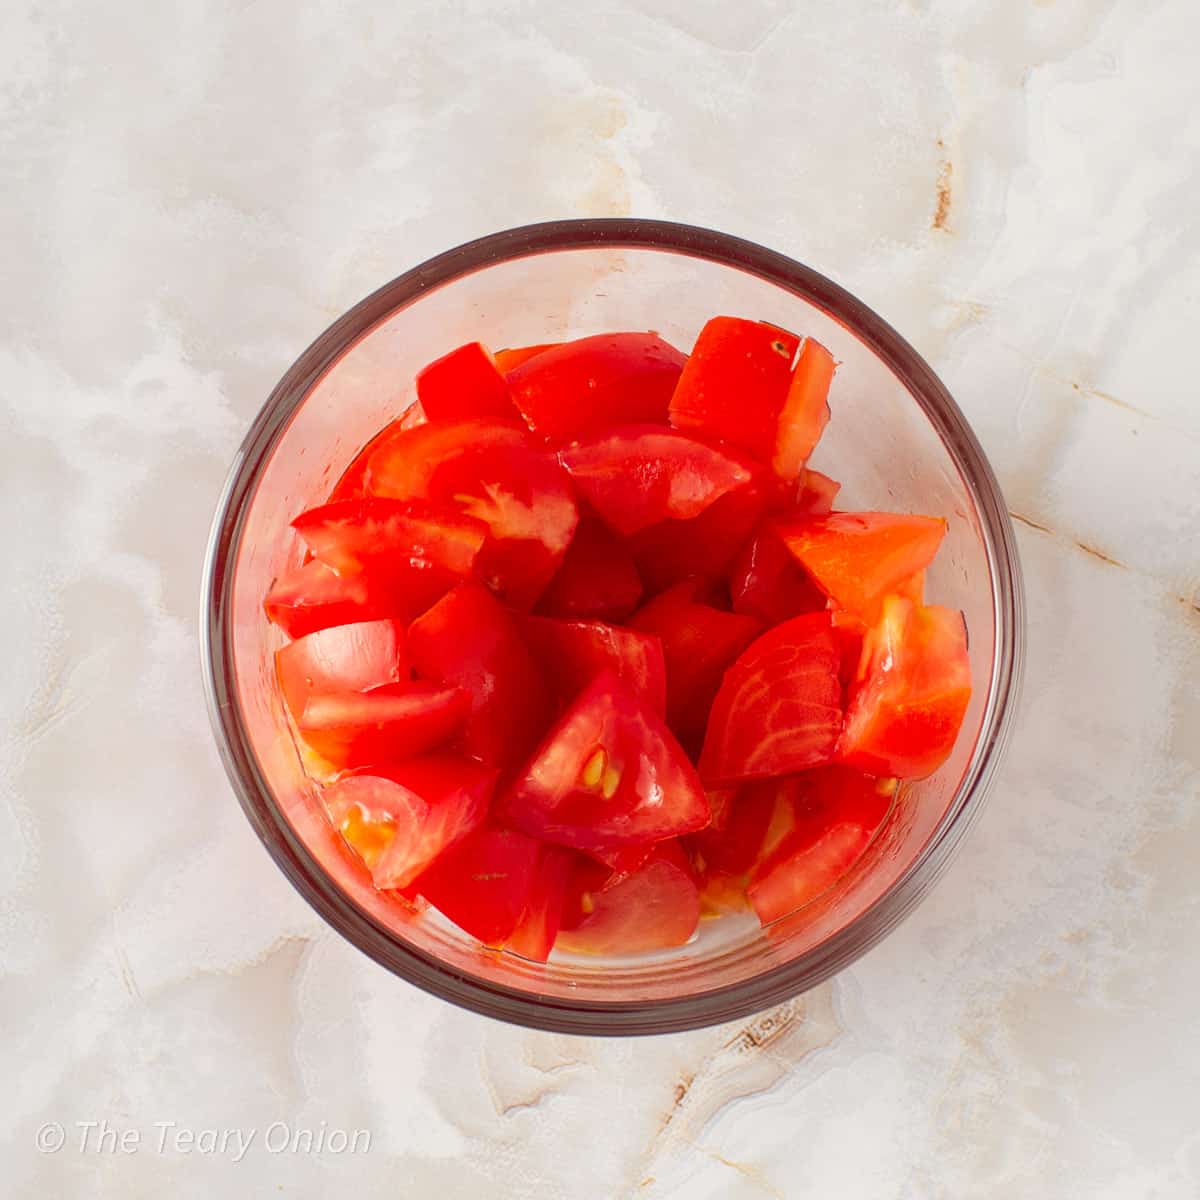 Diced tomatoes in a glass dish.